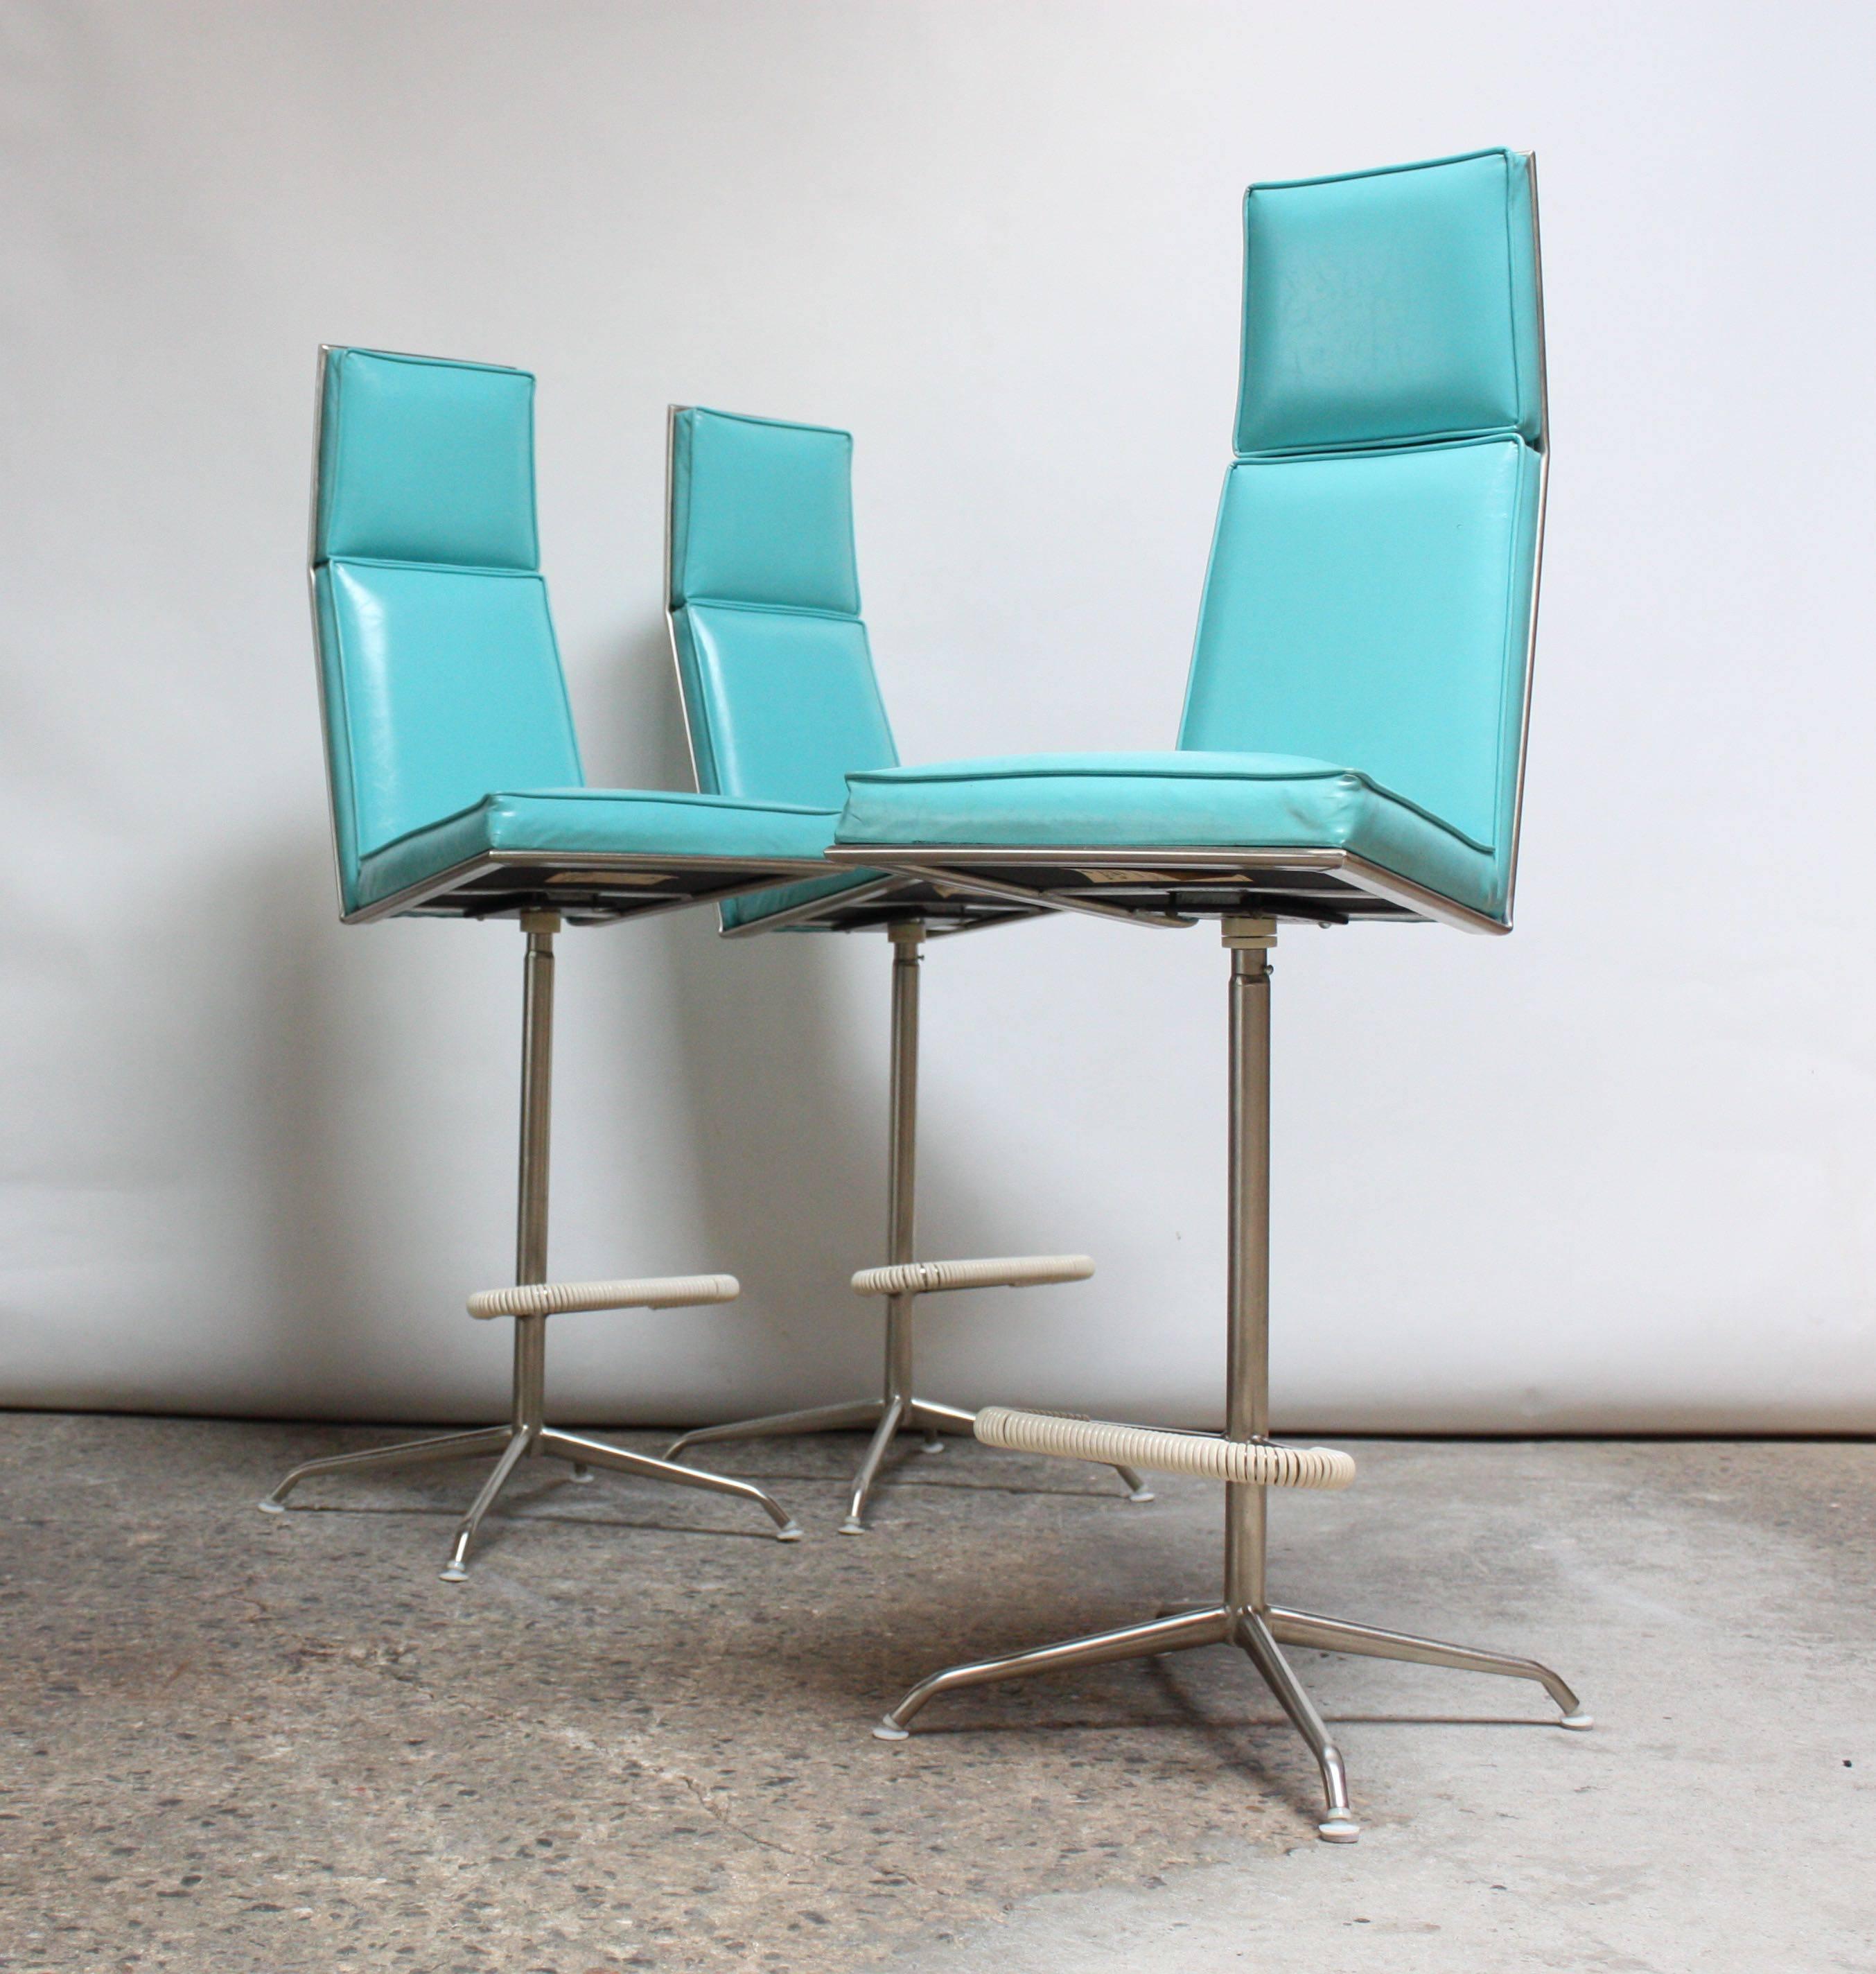 Set of three swivelling barstools composed of turquoise vinyl and brushed aluminium frames with cord-wrapped footrests.
Designed and manufactured by Jansko (USA, 1960s). Each stool retains the 'Jansko' fabric tag to the underside.
Minor wear to